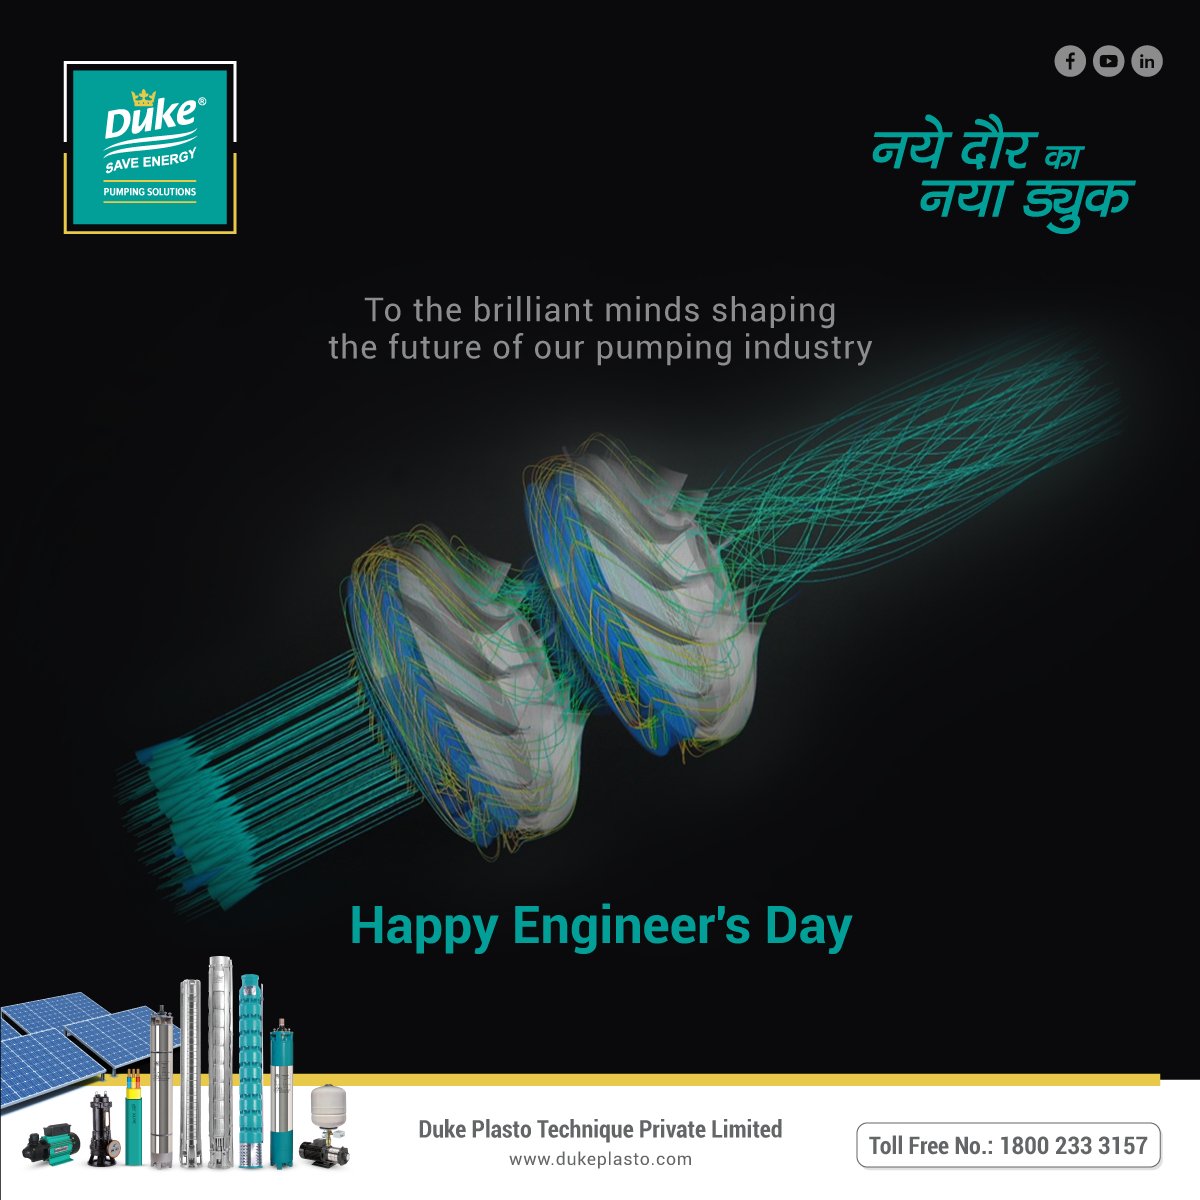 🔥Engineer's Day is a special day when we honor and appreciate the clever folks who make our pumping industry work smoothly.

#engineersday #engineersday2023 #customizedproducts #manufacturingquality #pumpingservices #pumpsolutions #pump #dukepump #dukeplasto